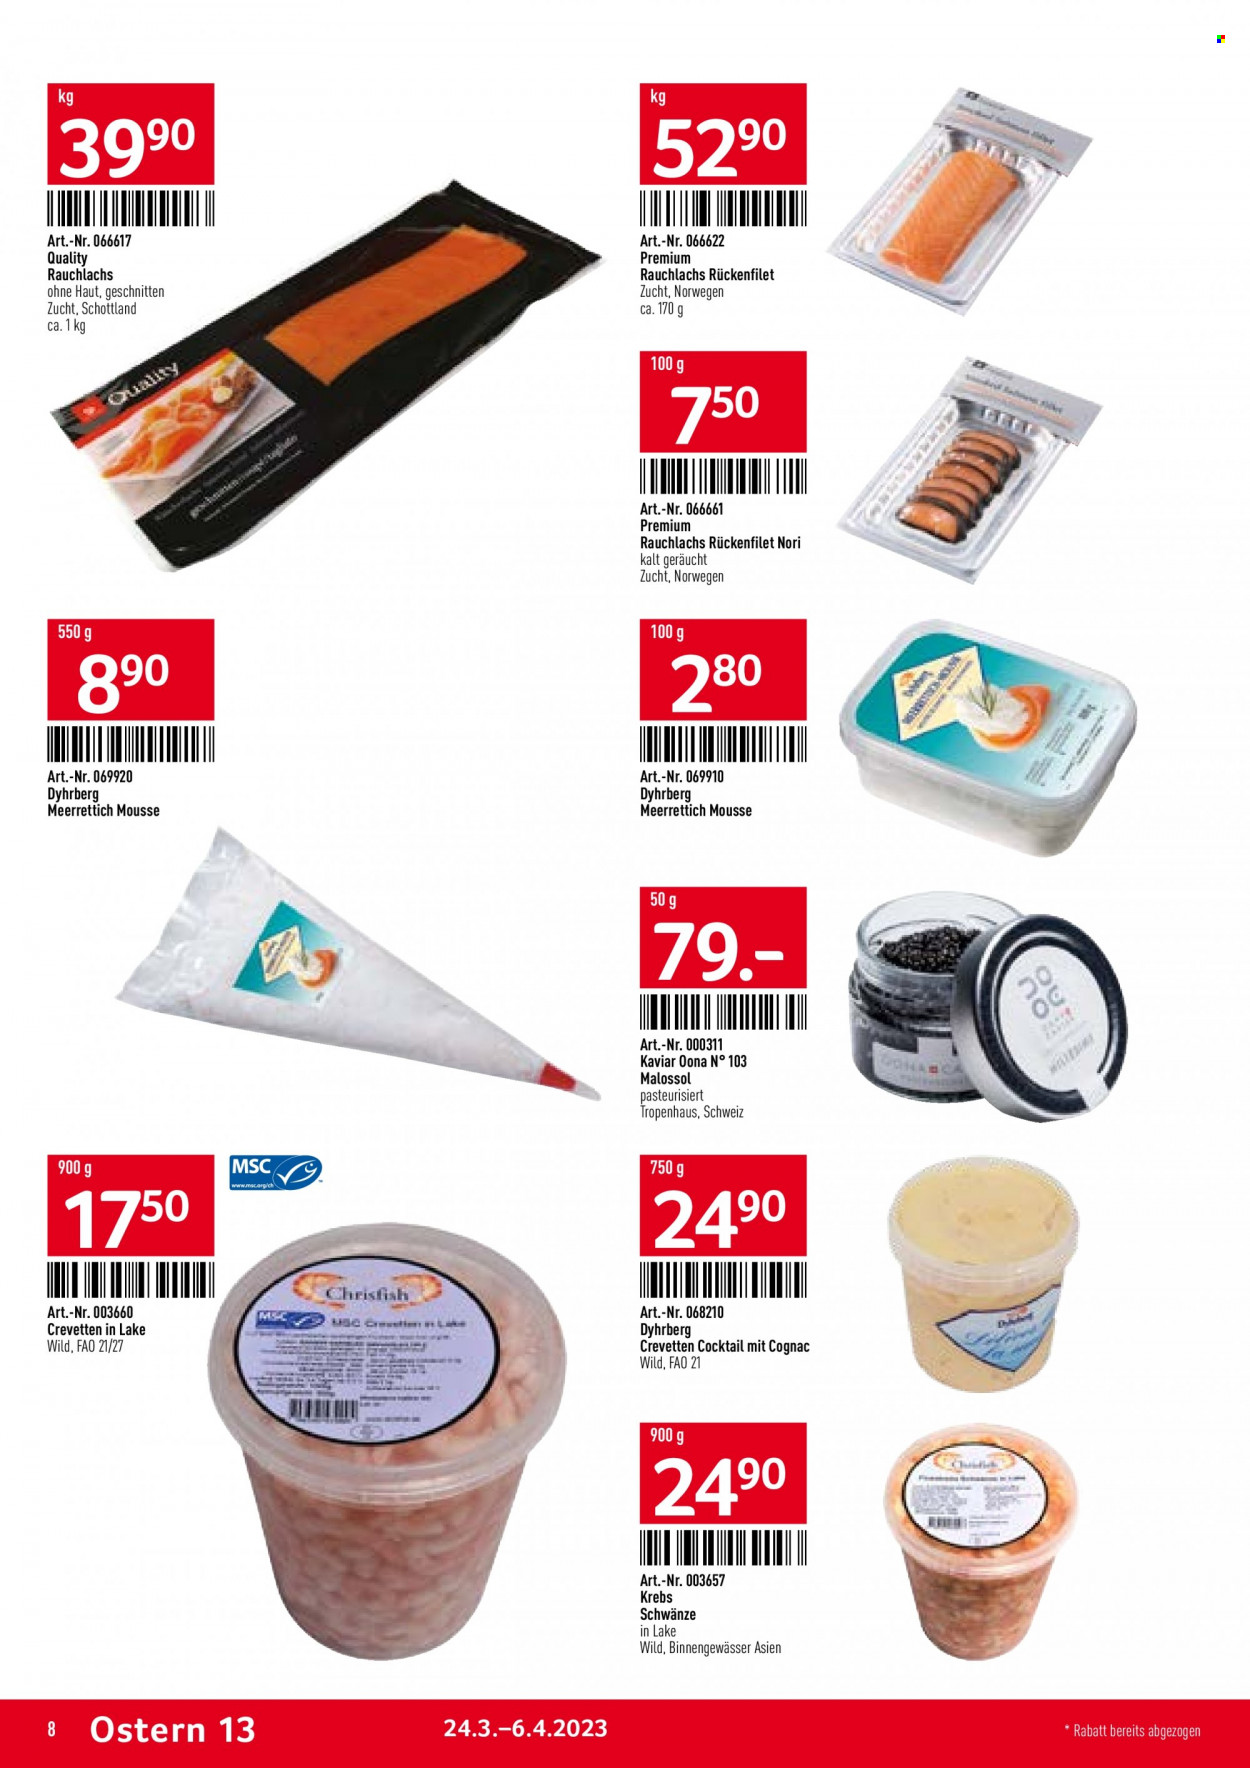 Catalogue TransGourmet - 24.3.2023 - 6.4.2023. Page 8.